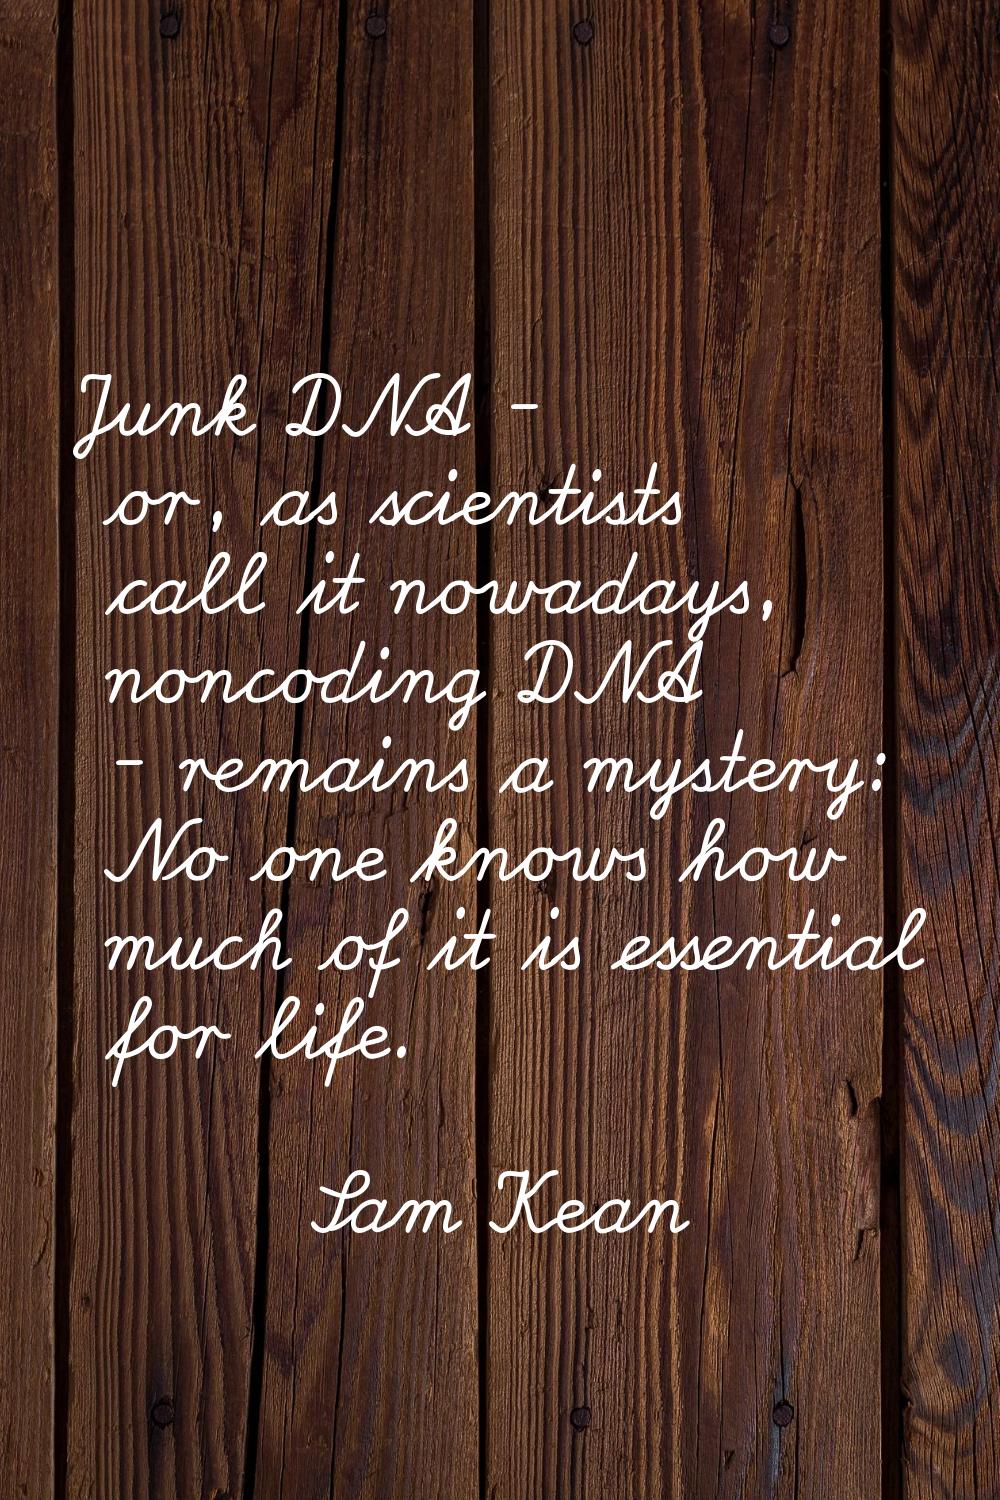 Junk DNA - or, as scientists call it nowadays, noncoding DNA - remains a mystery: No one knows how 